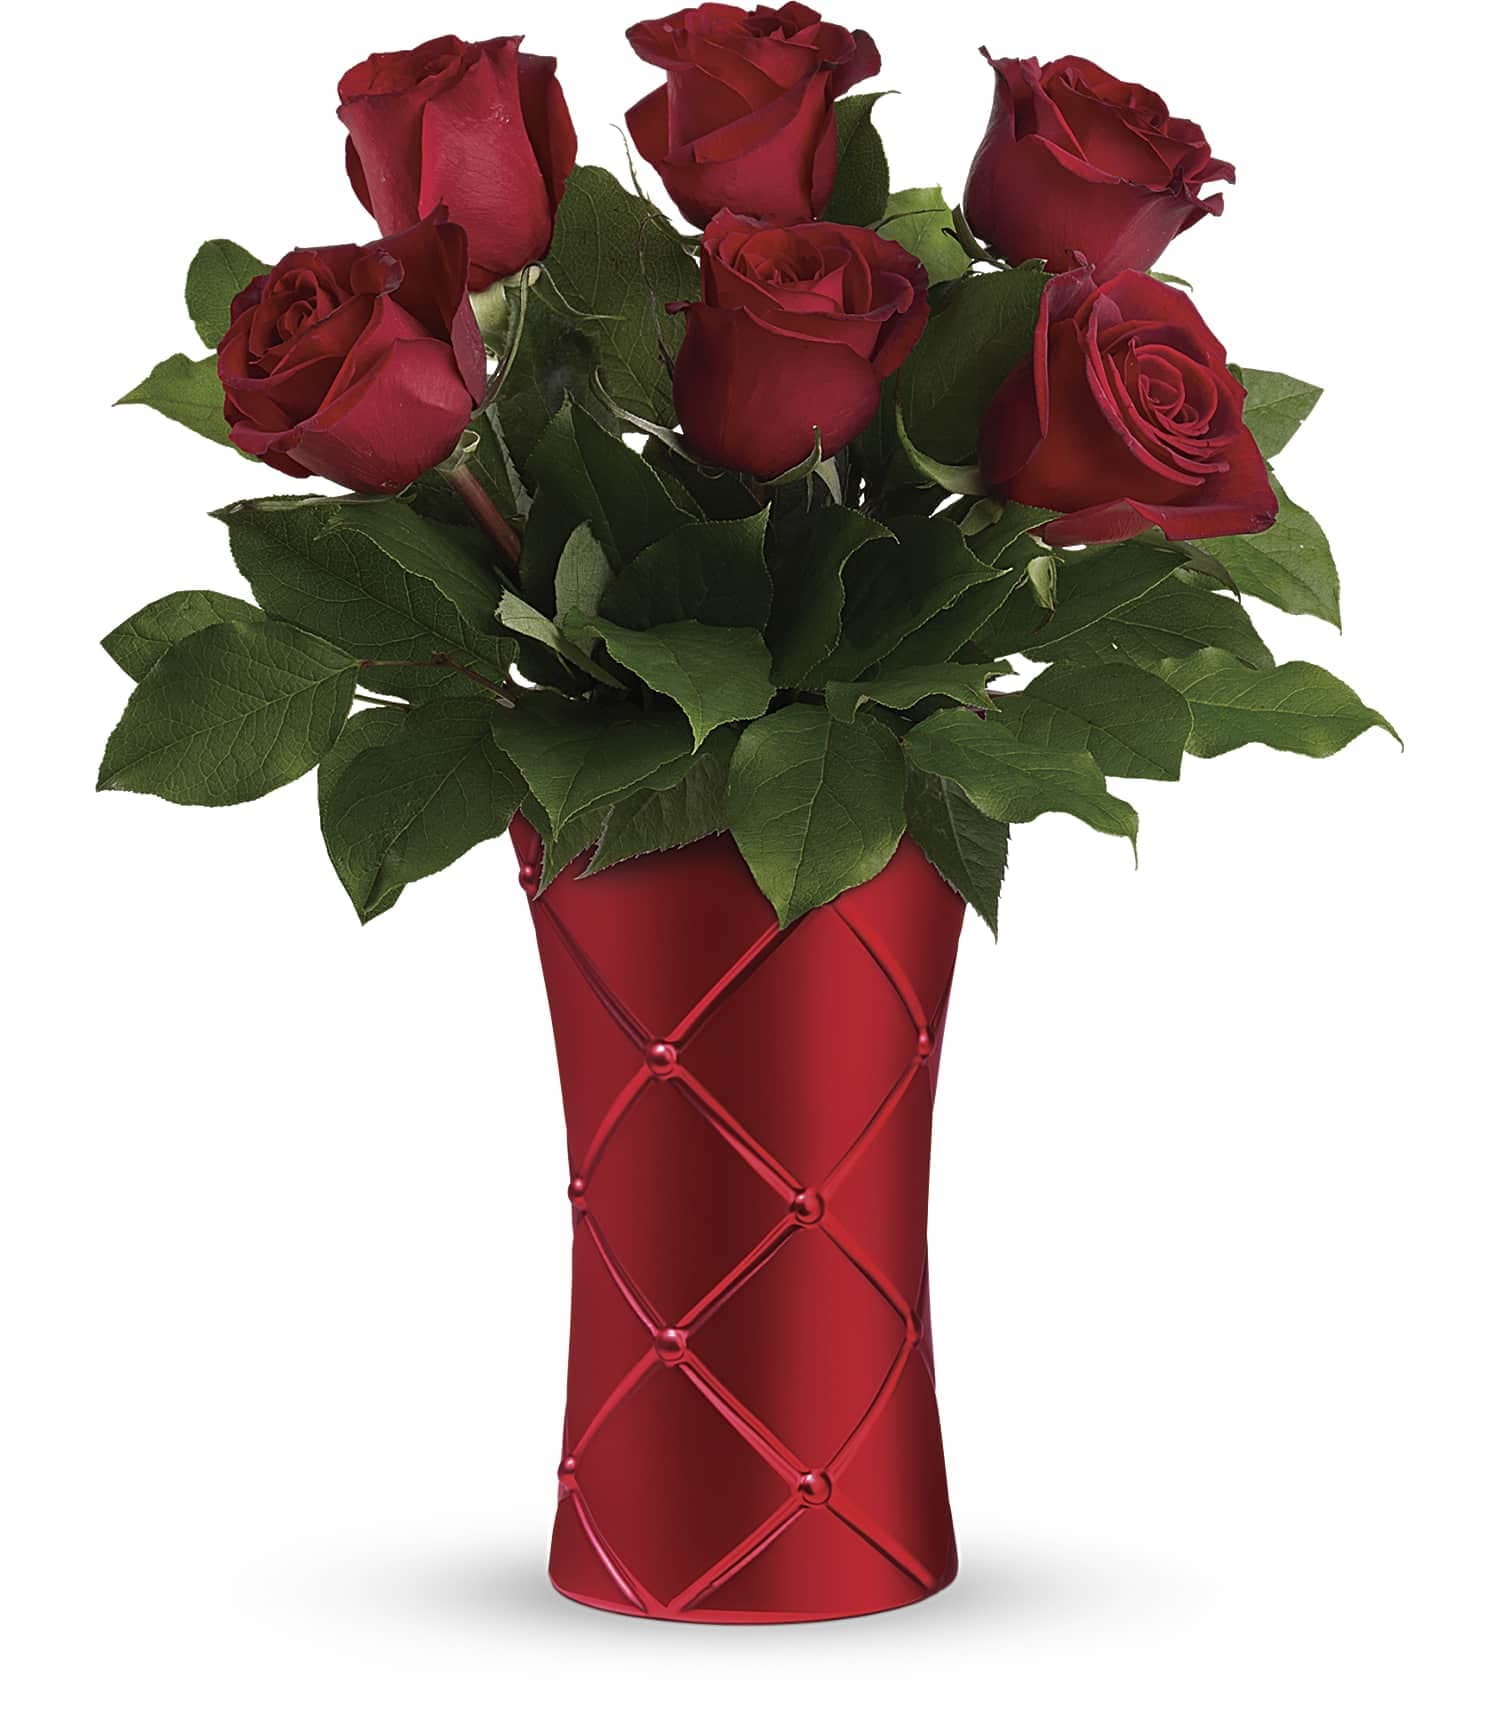 Teleflora's Crimson Luxury Bouquet - Luxurious romance is yours with this classic red rose bouquet, presented to perfection in a stunning, satin-finish ceramic vase with unique quilted texture. 